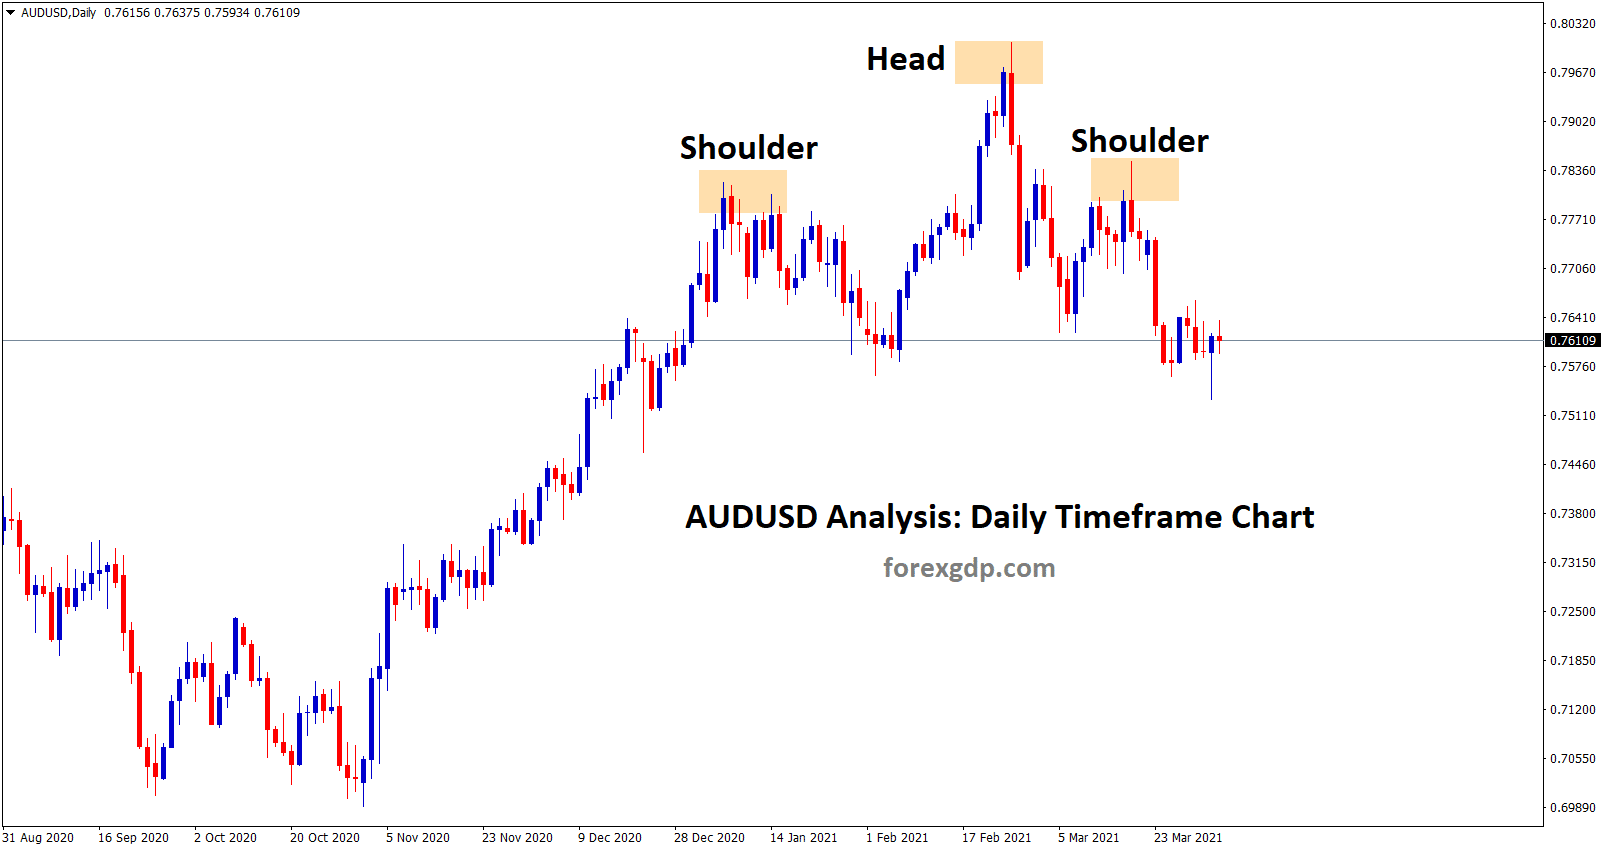 AUDUSD head and shoulder pattern formed in the daily chart